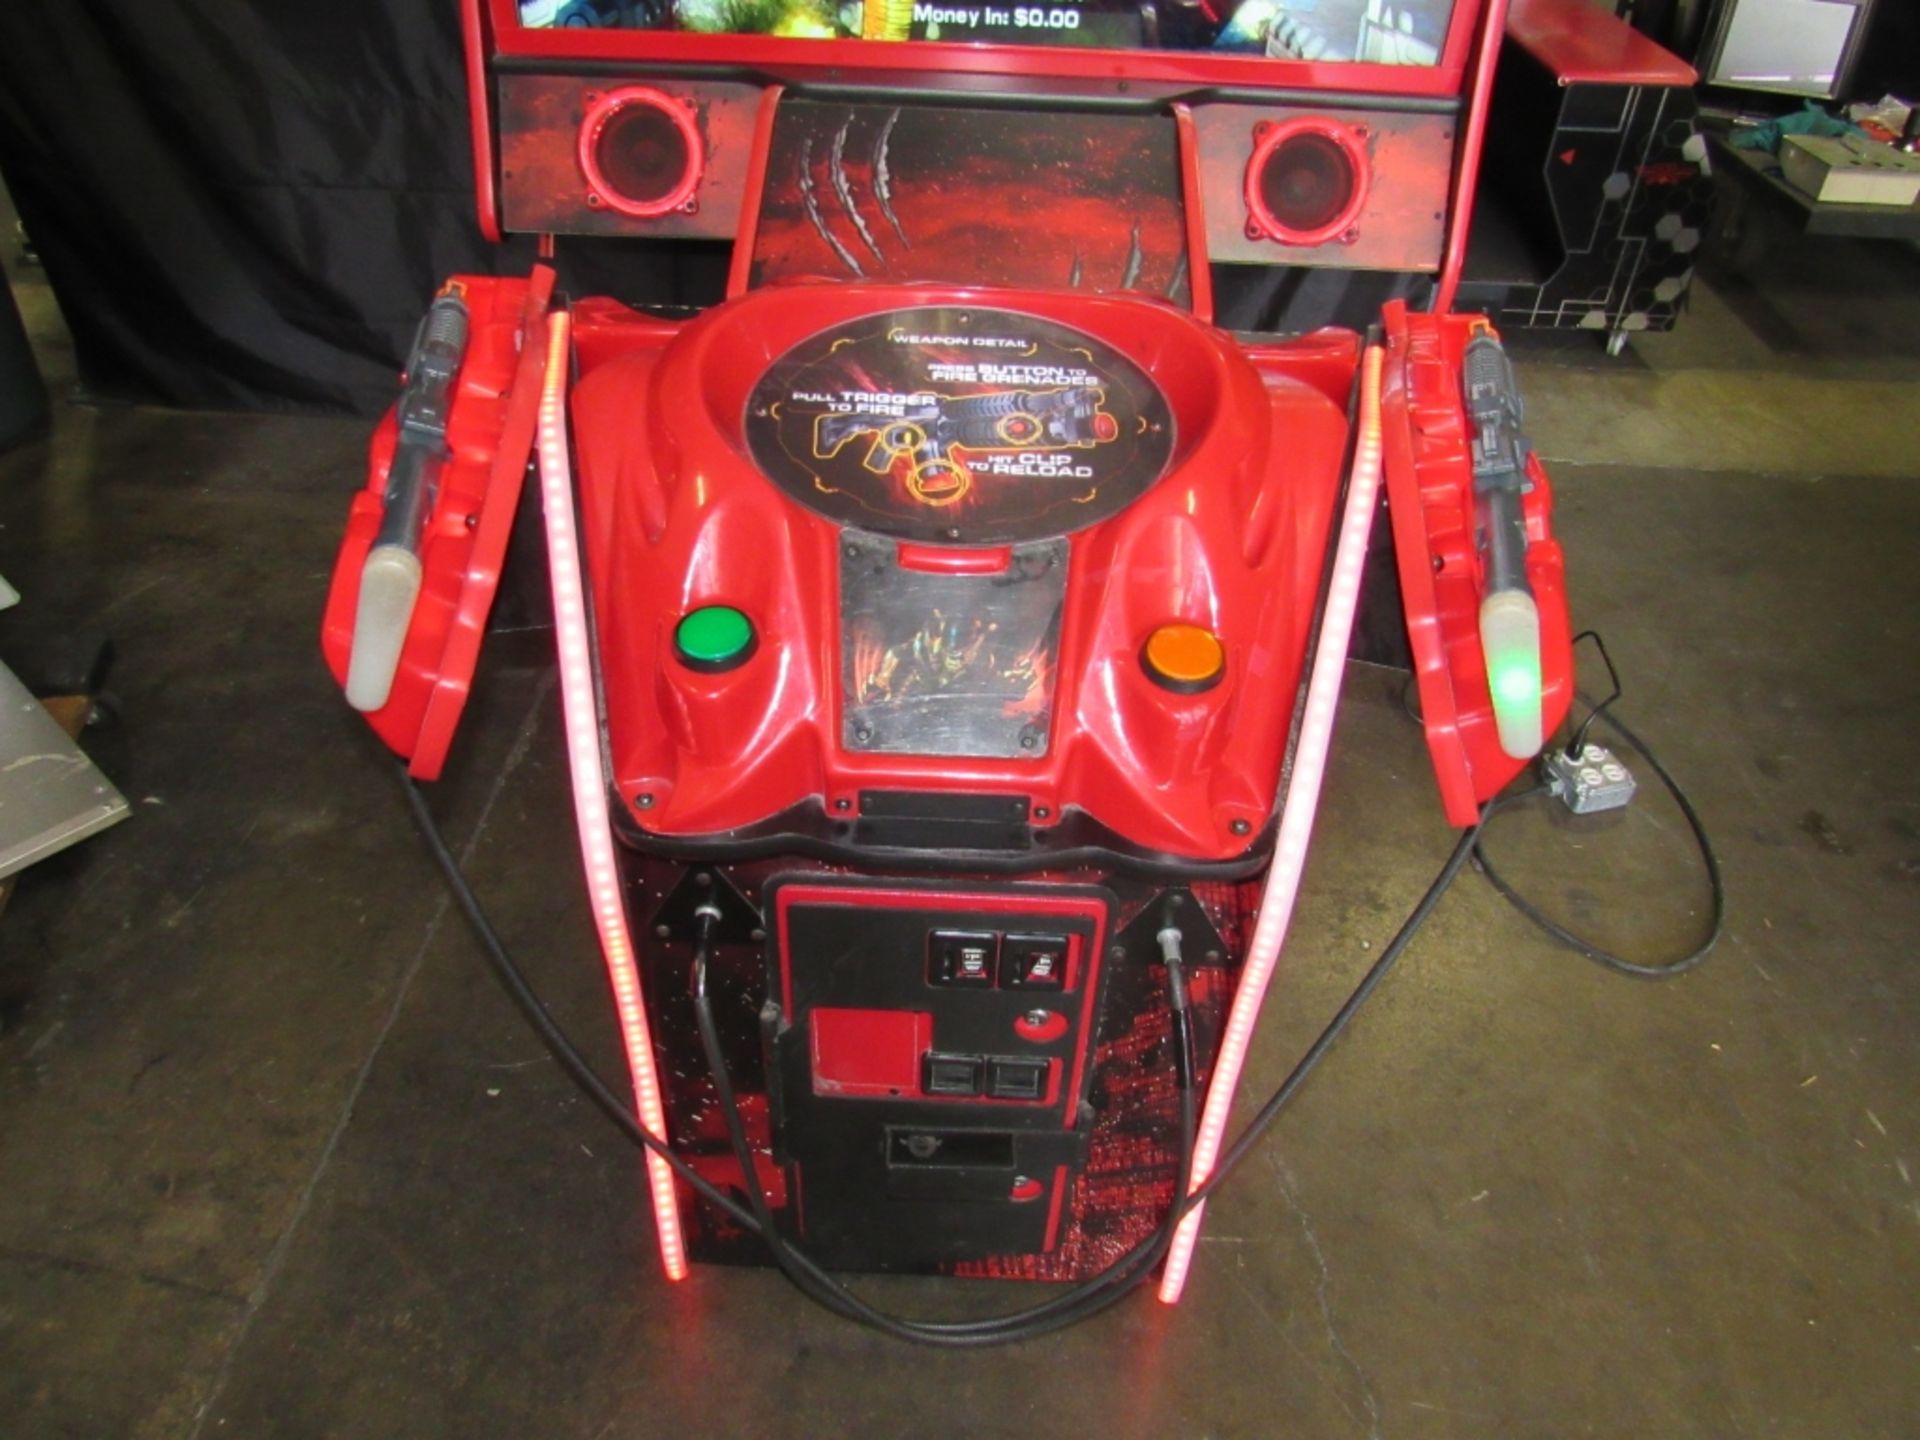 ALIENS ARMAGEDDON 55" LCD DELUXE ARCADE GAME - Image 3 of 9